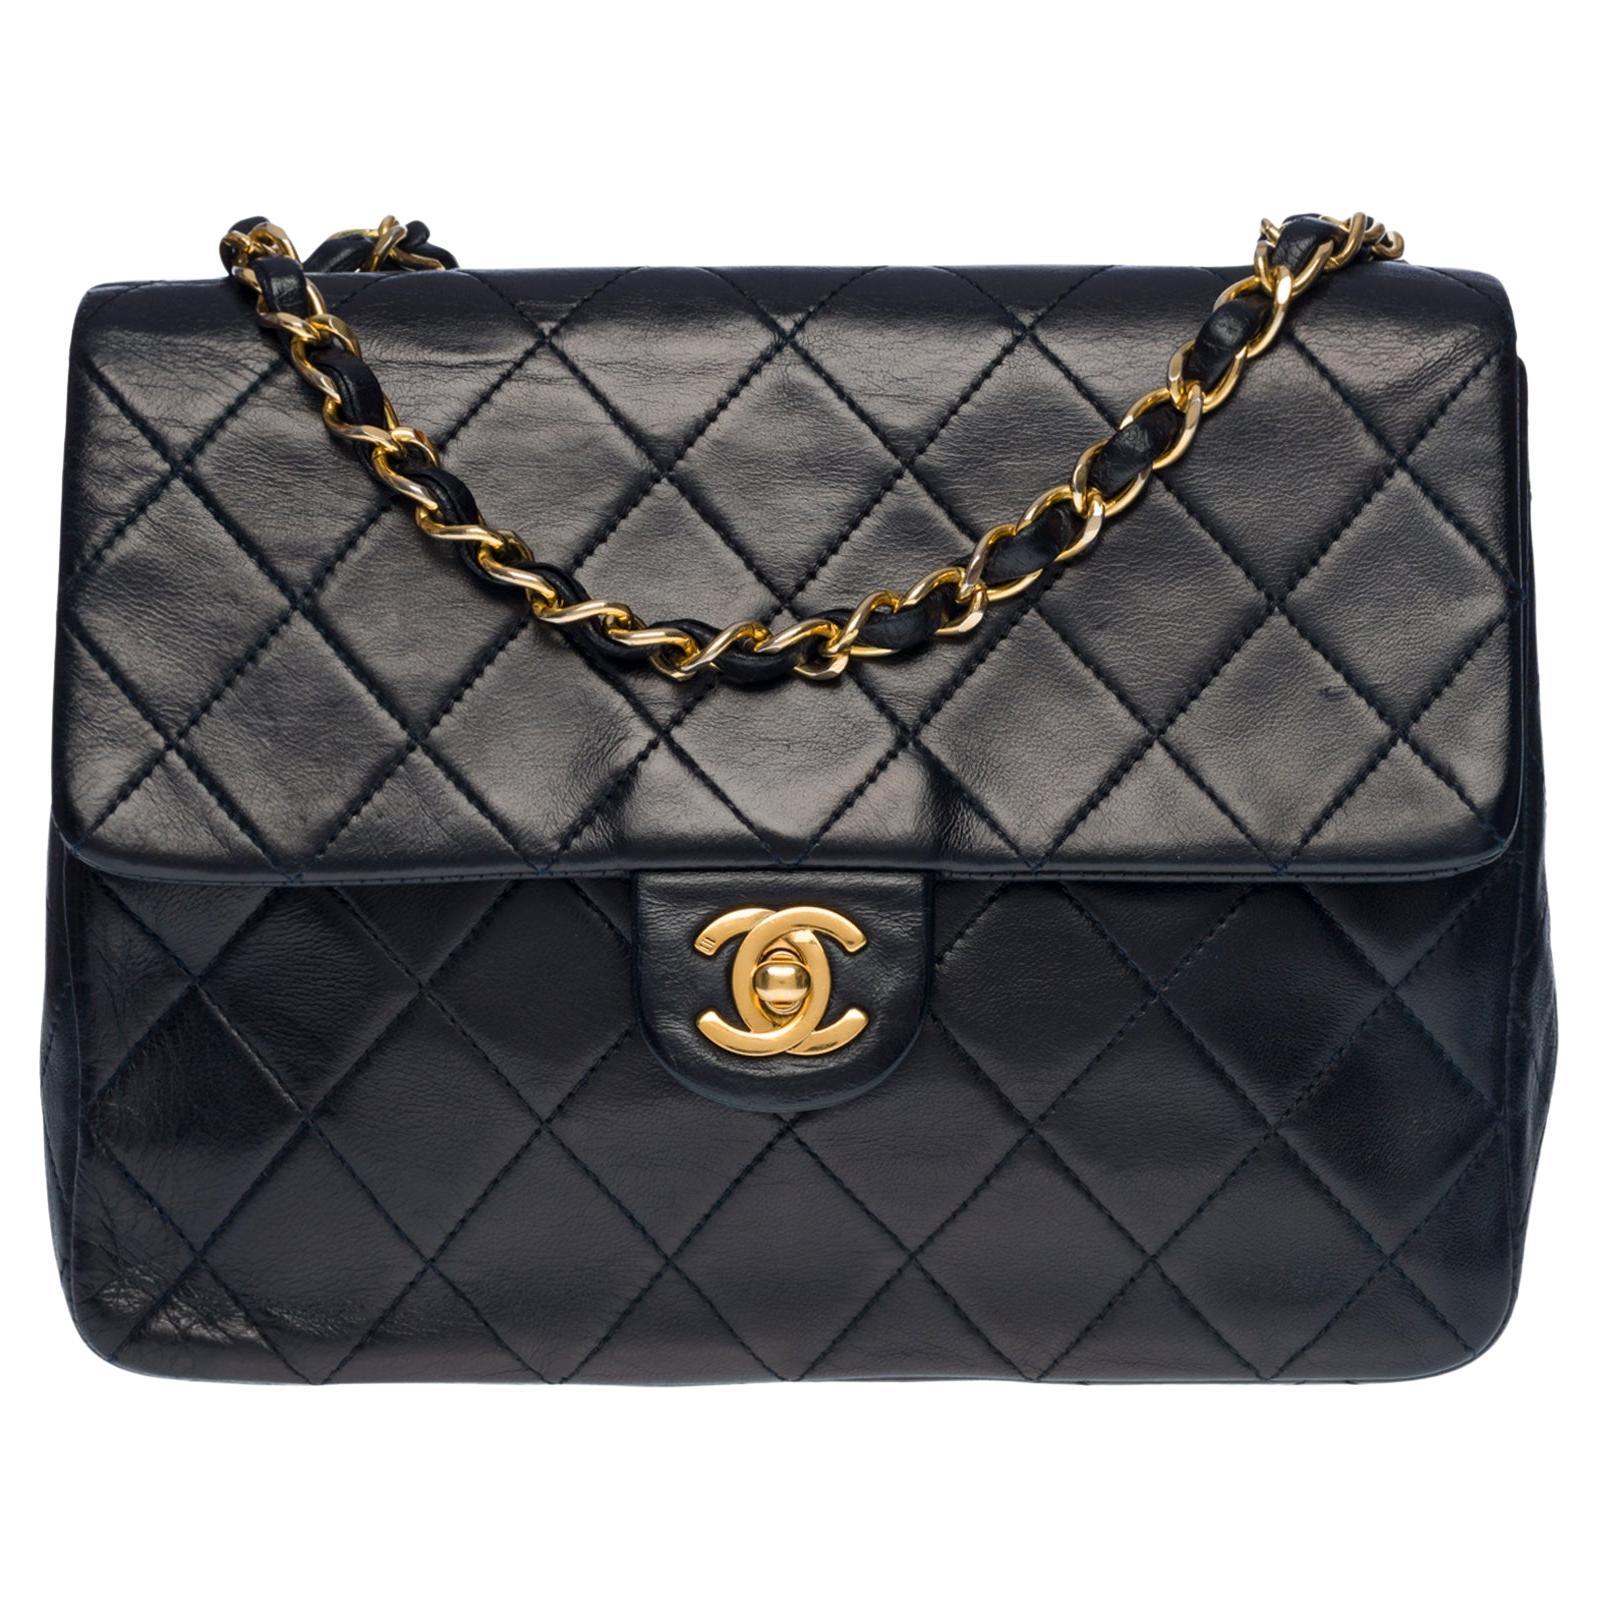 Chanel Timeless Medium double flap shoulder bag in black quilted